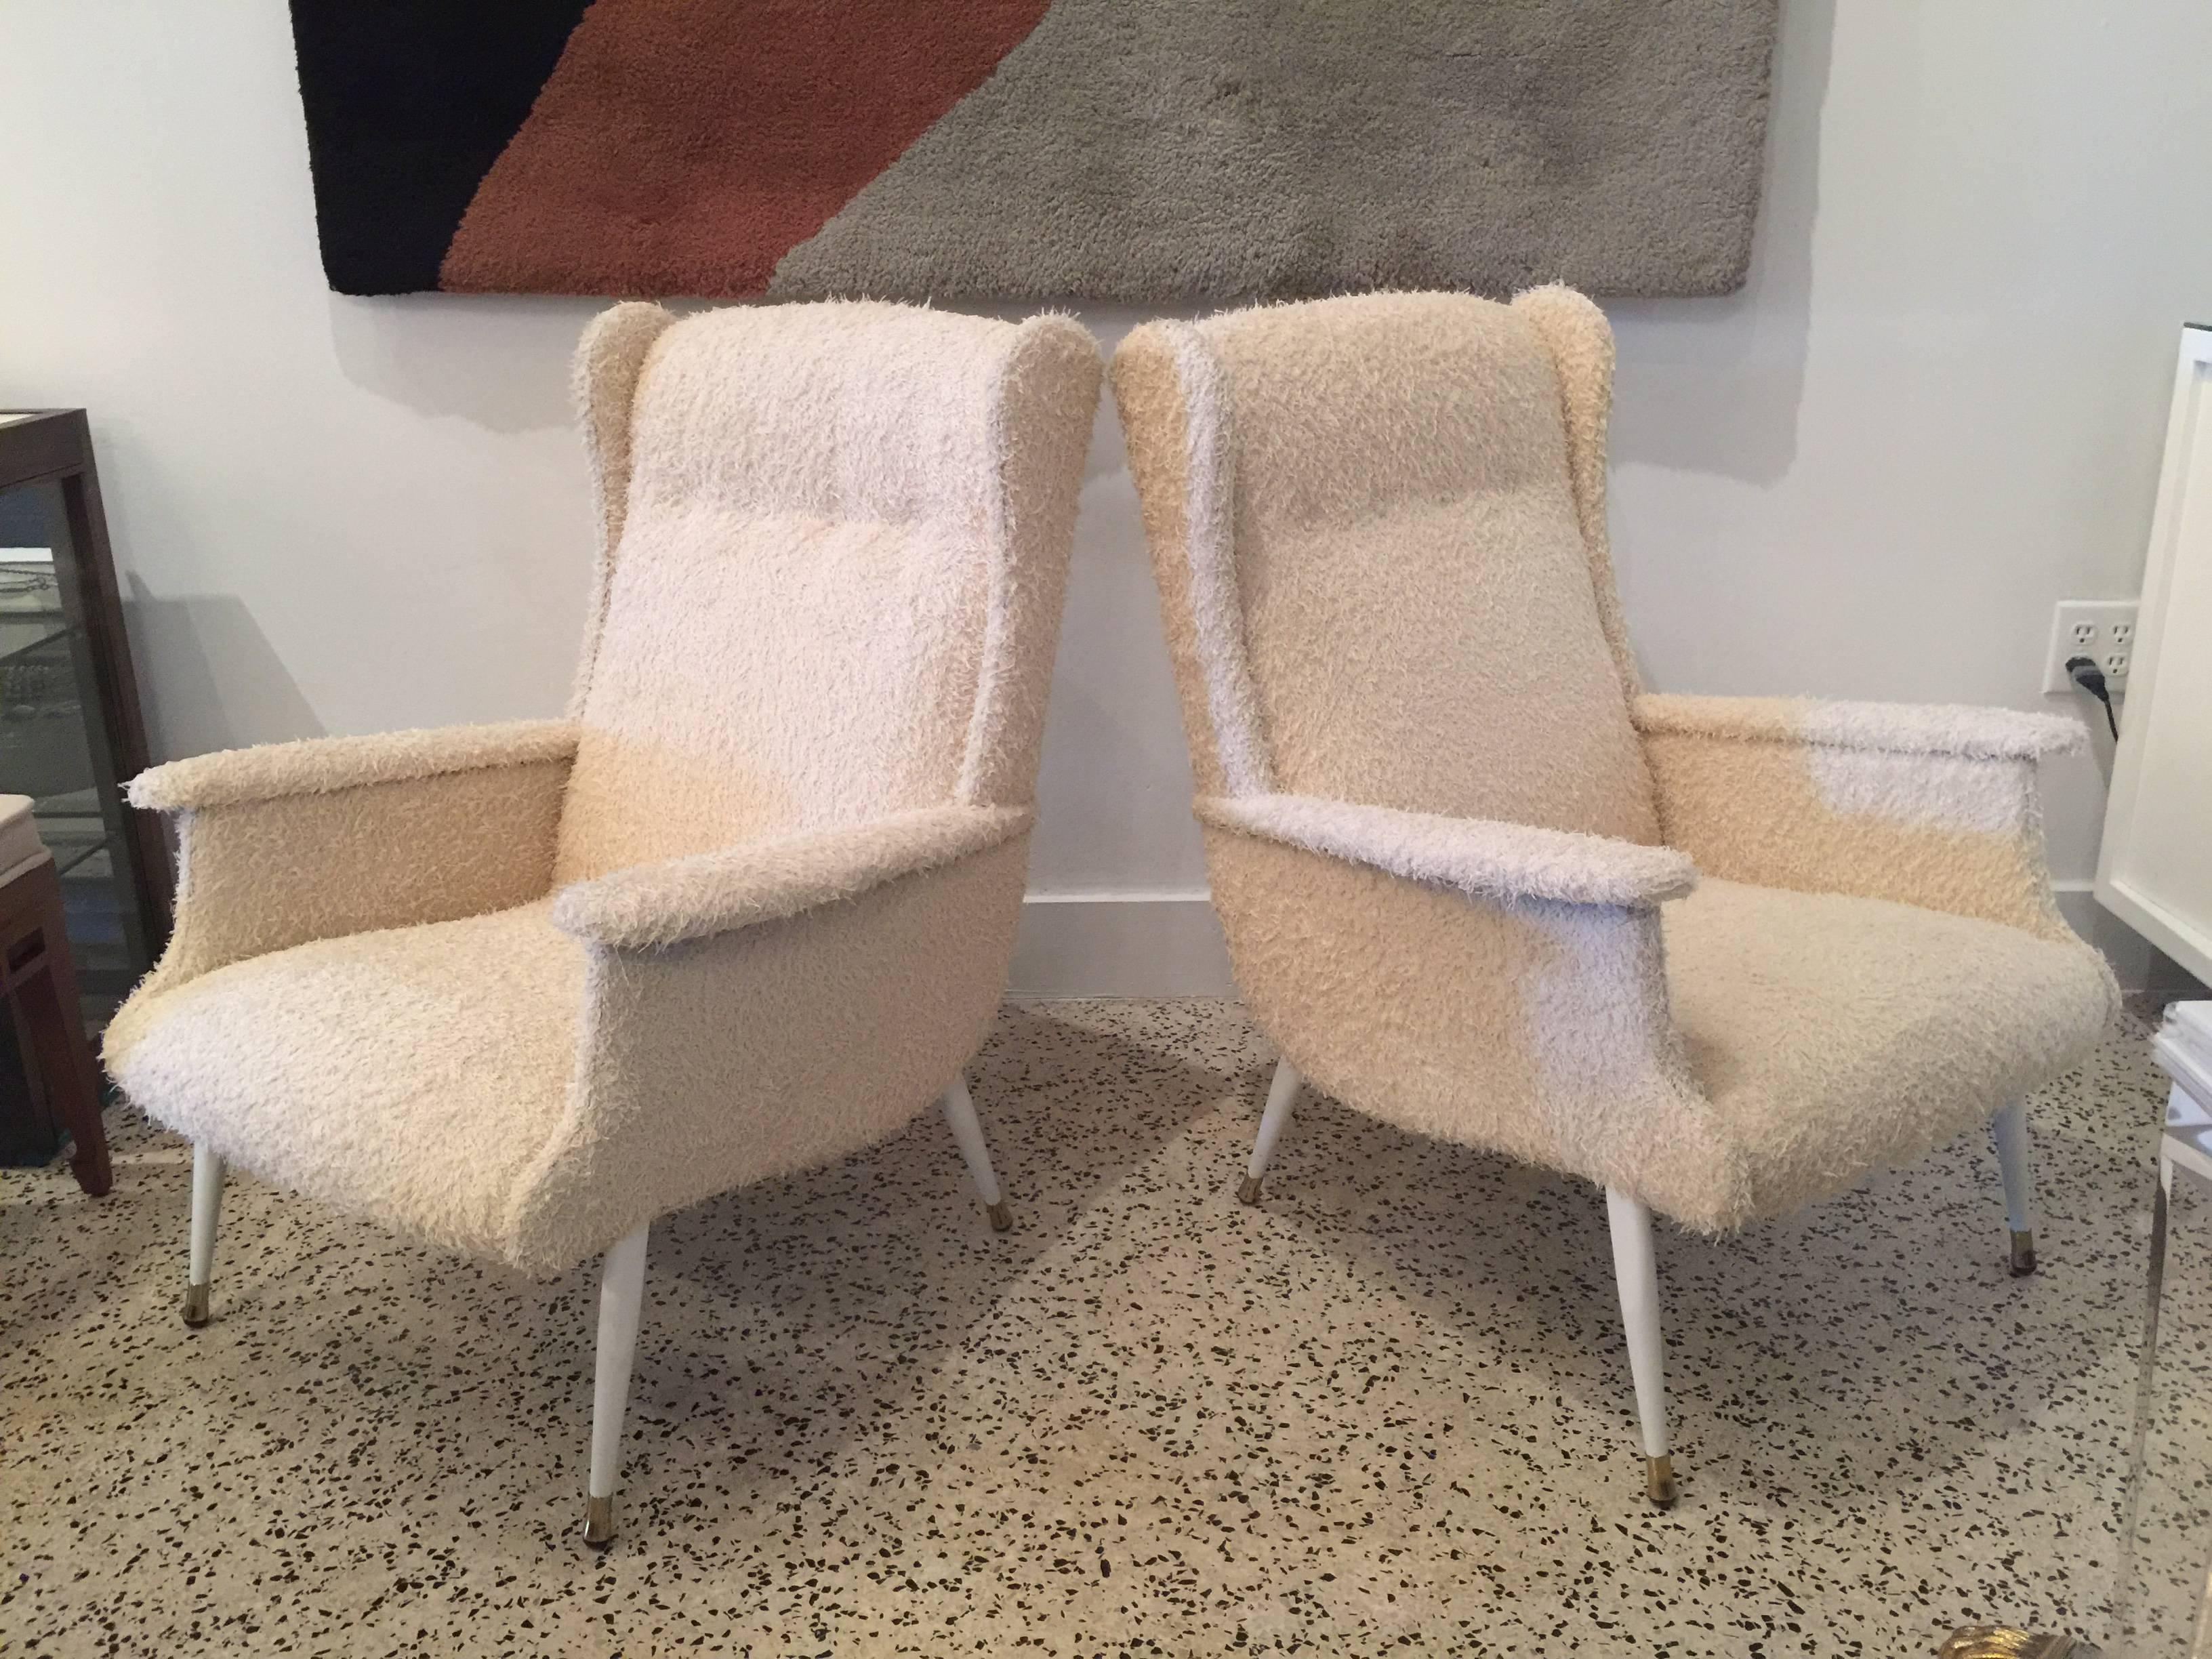 Bone colored low shag fabric add some whimsy to these restored vintage armchairs.